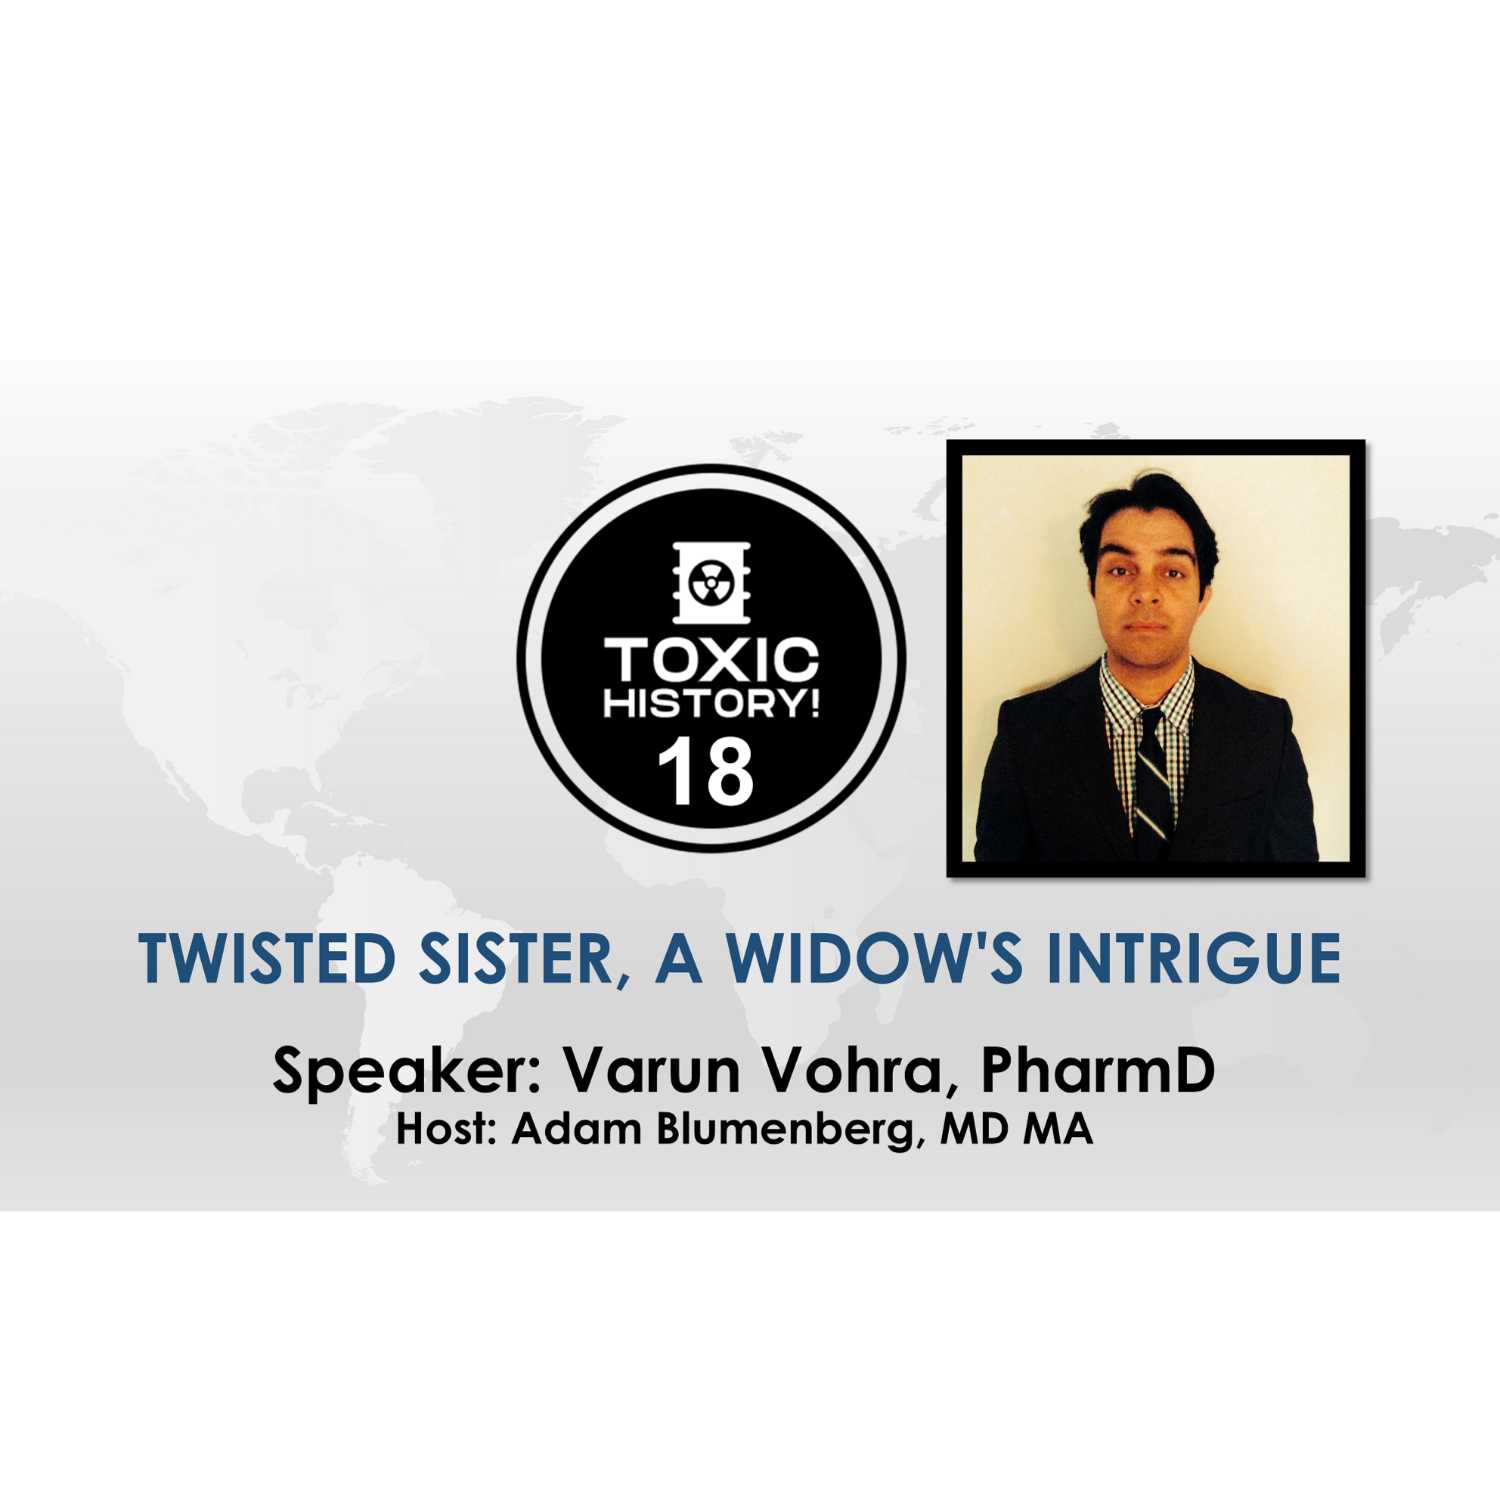 Twisted Sister, a Widow's Intrigue